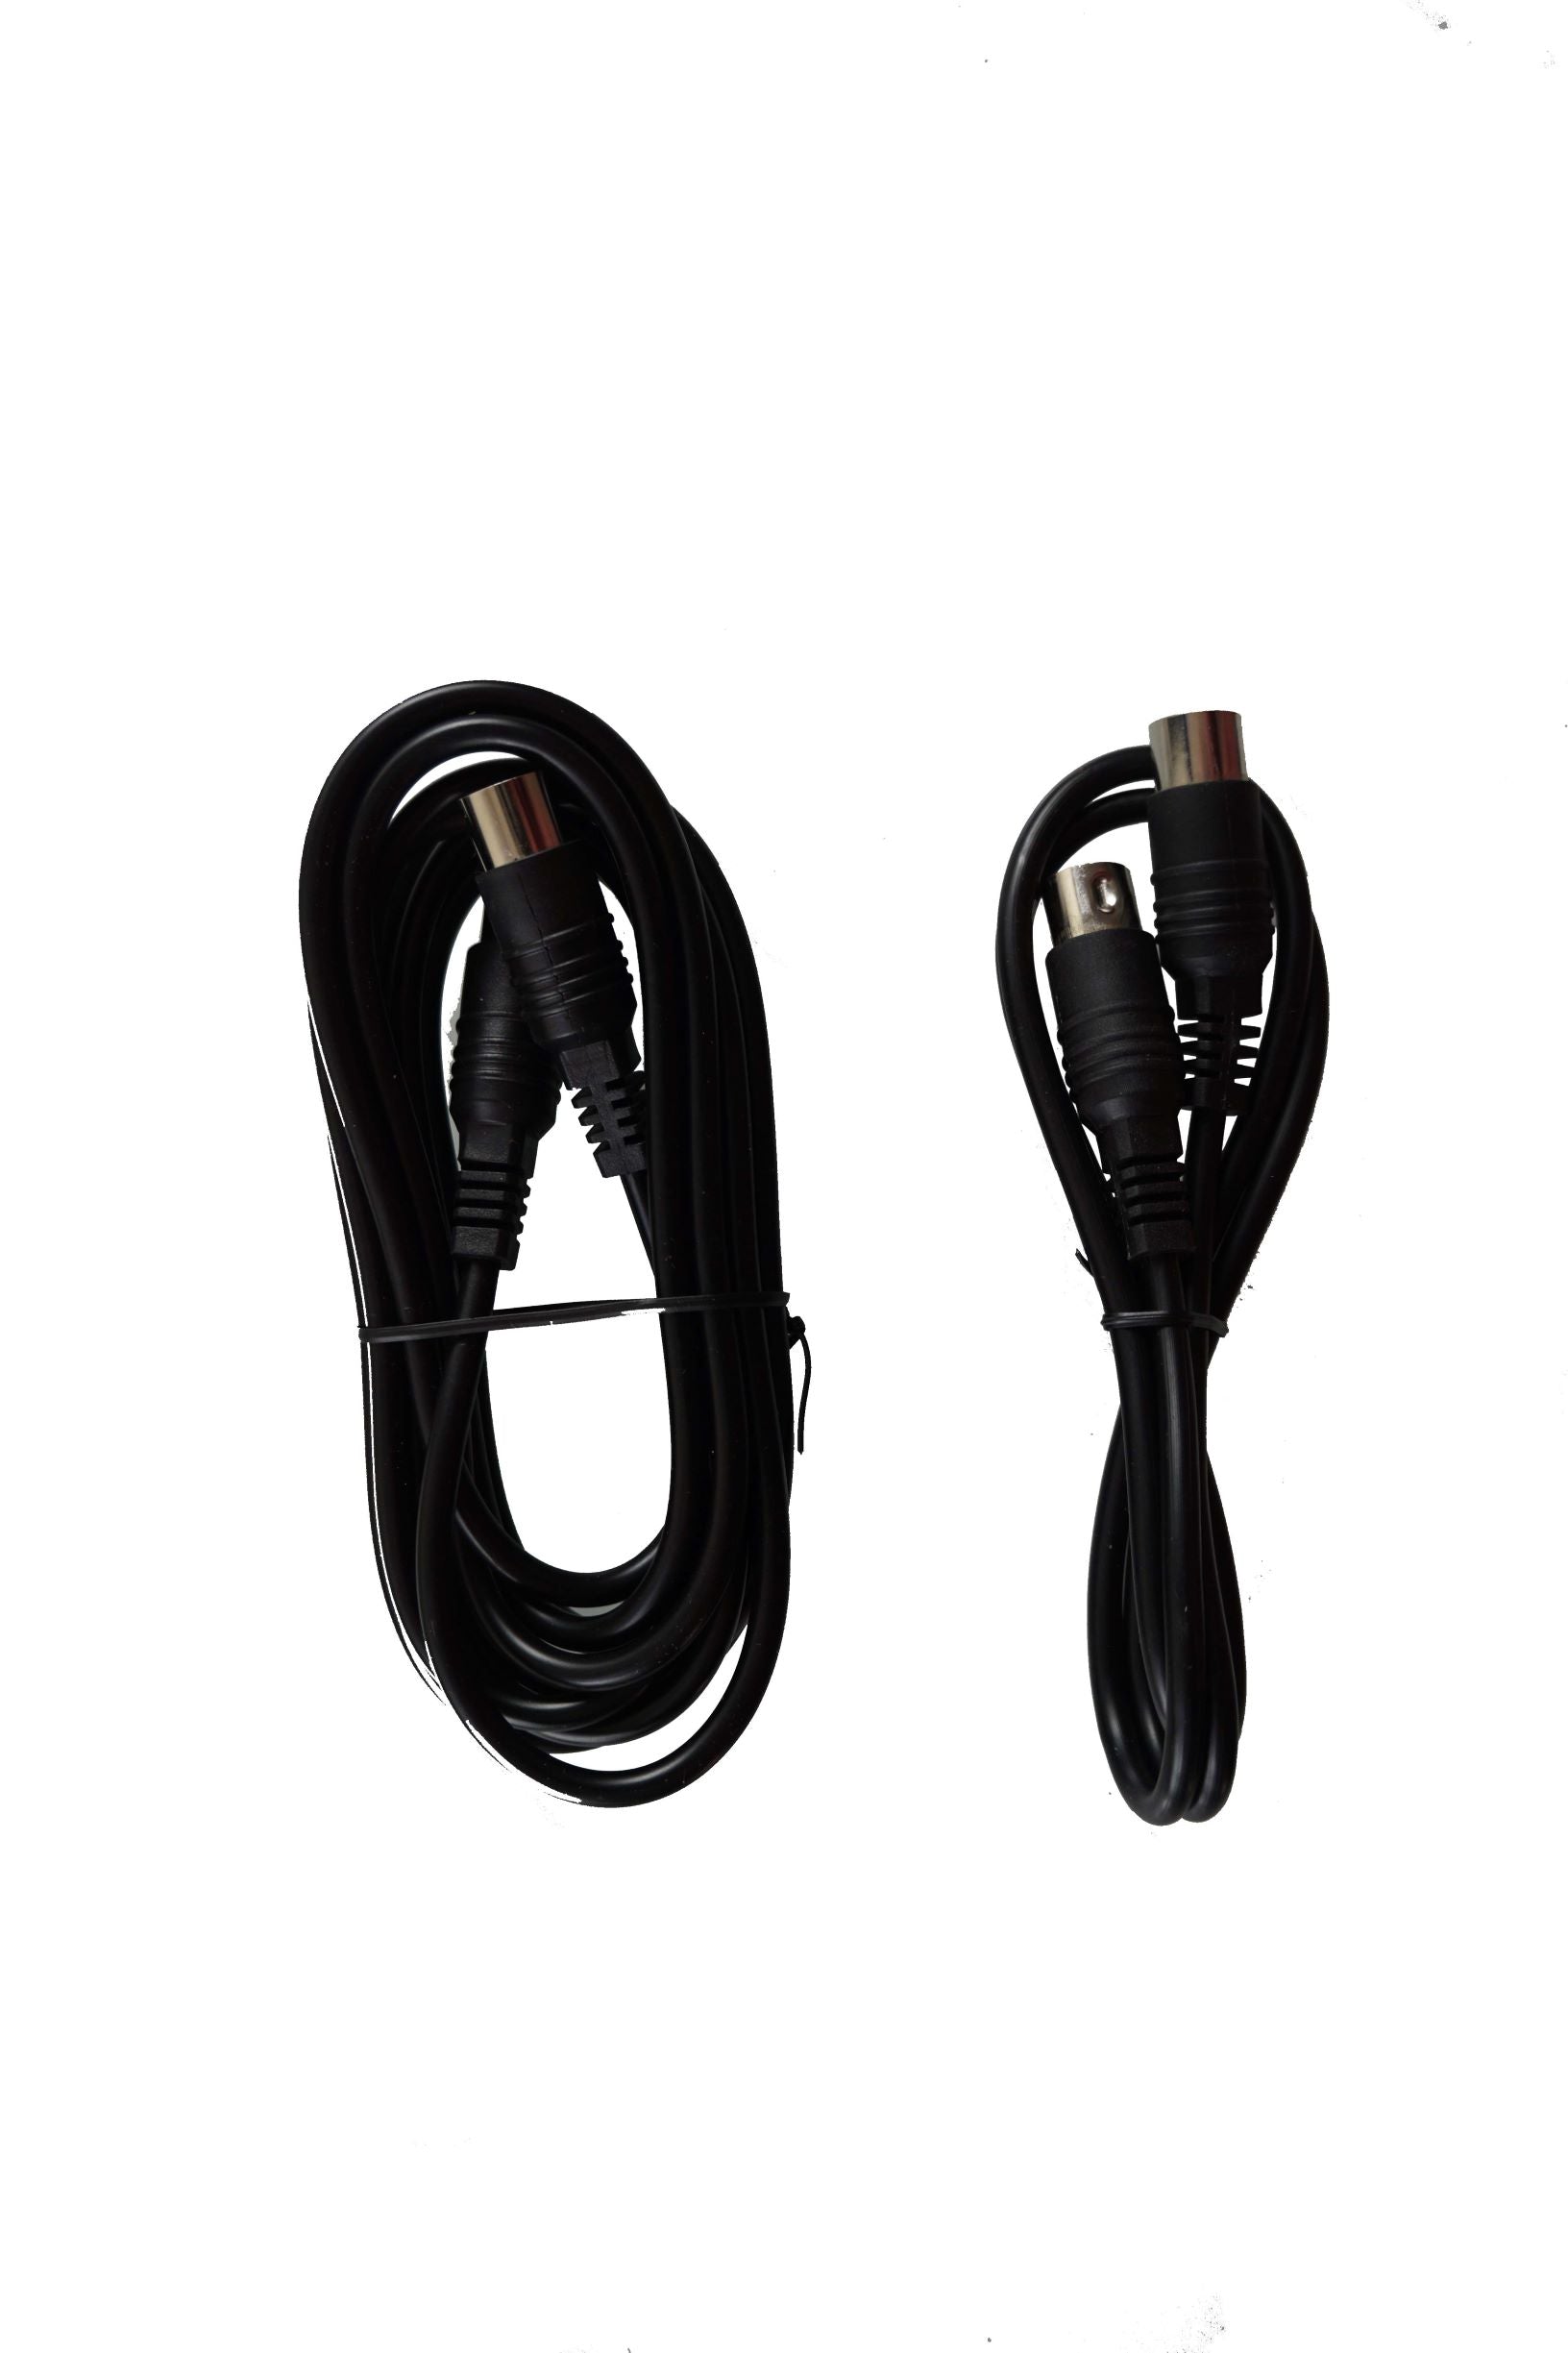 6-Pin DIN Cables